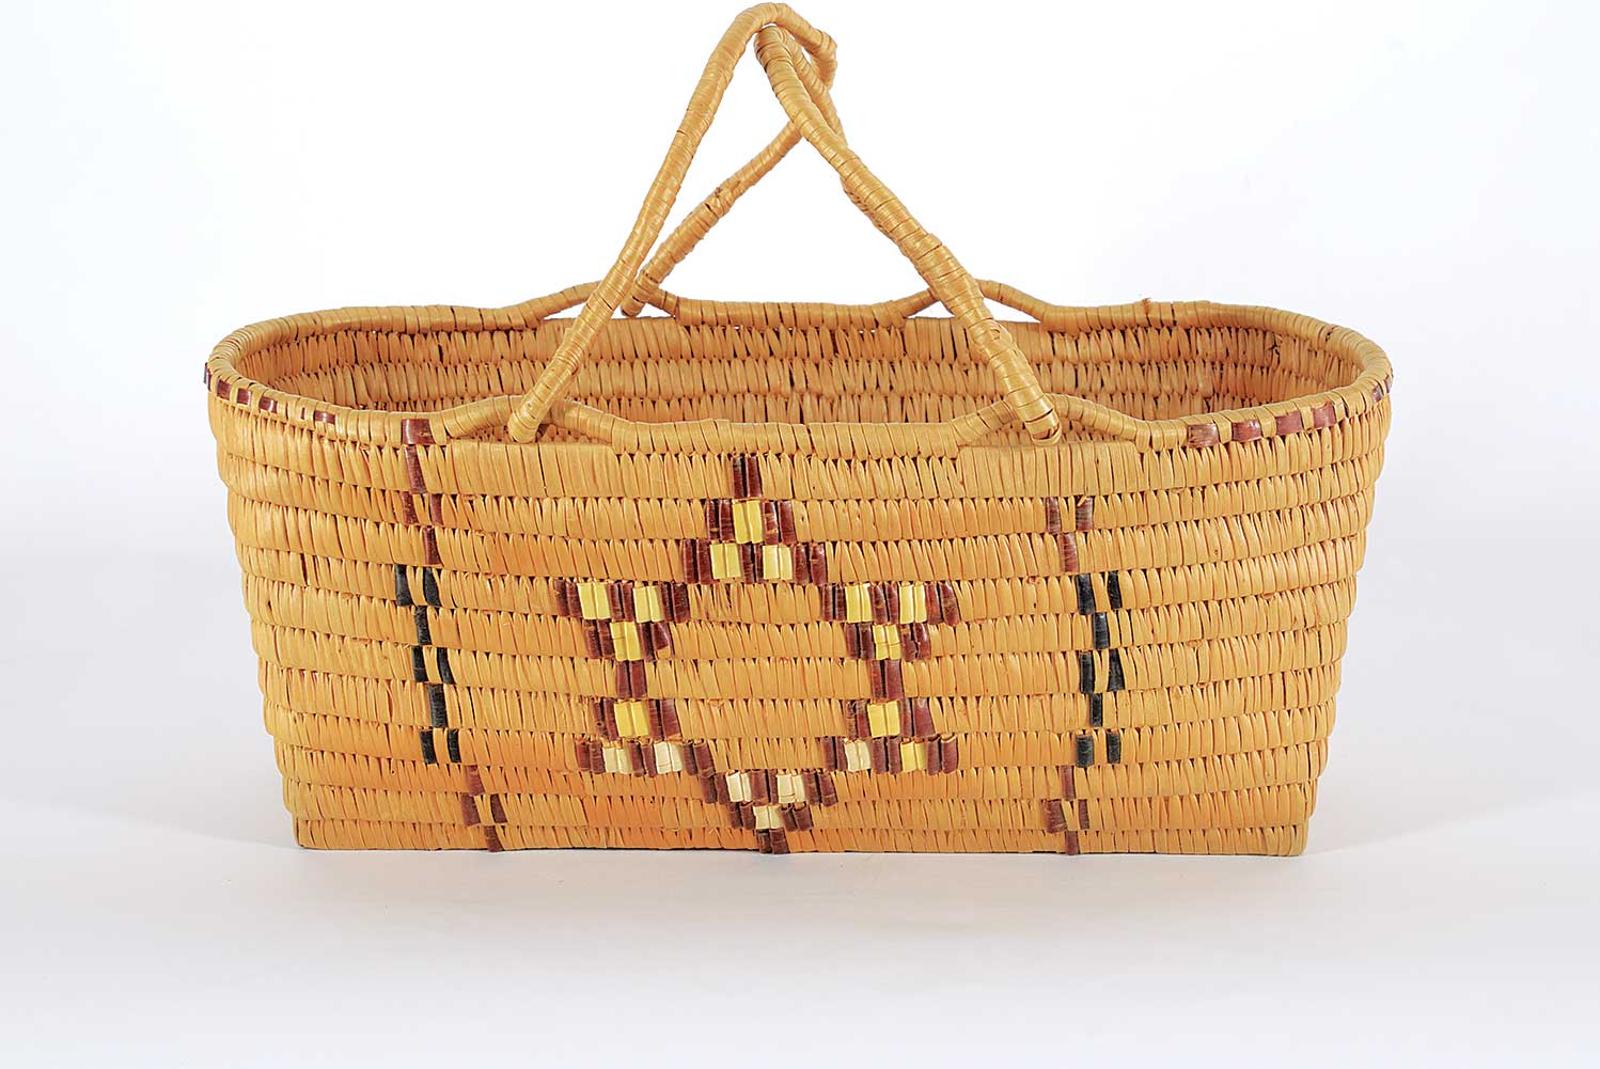 Northwest Coast First Nations School - Oval Basket with Handles and Star Patterns